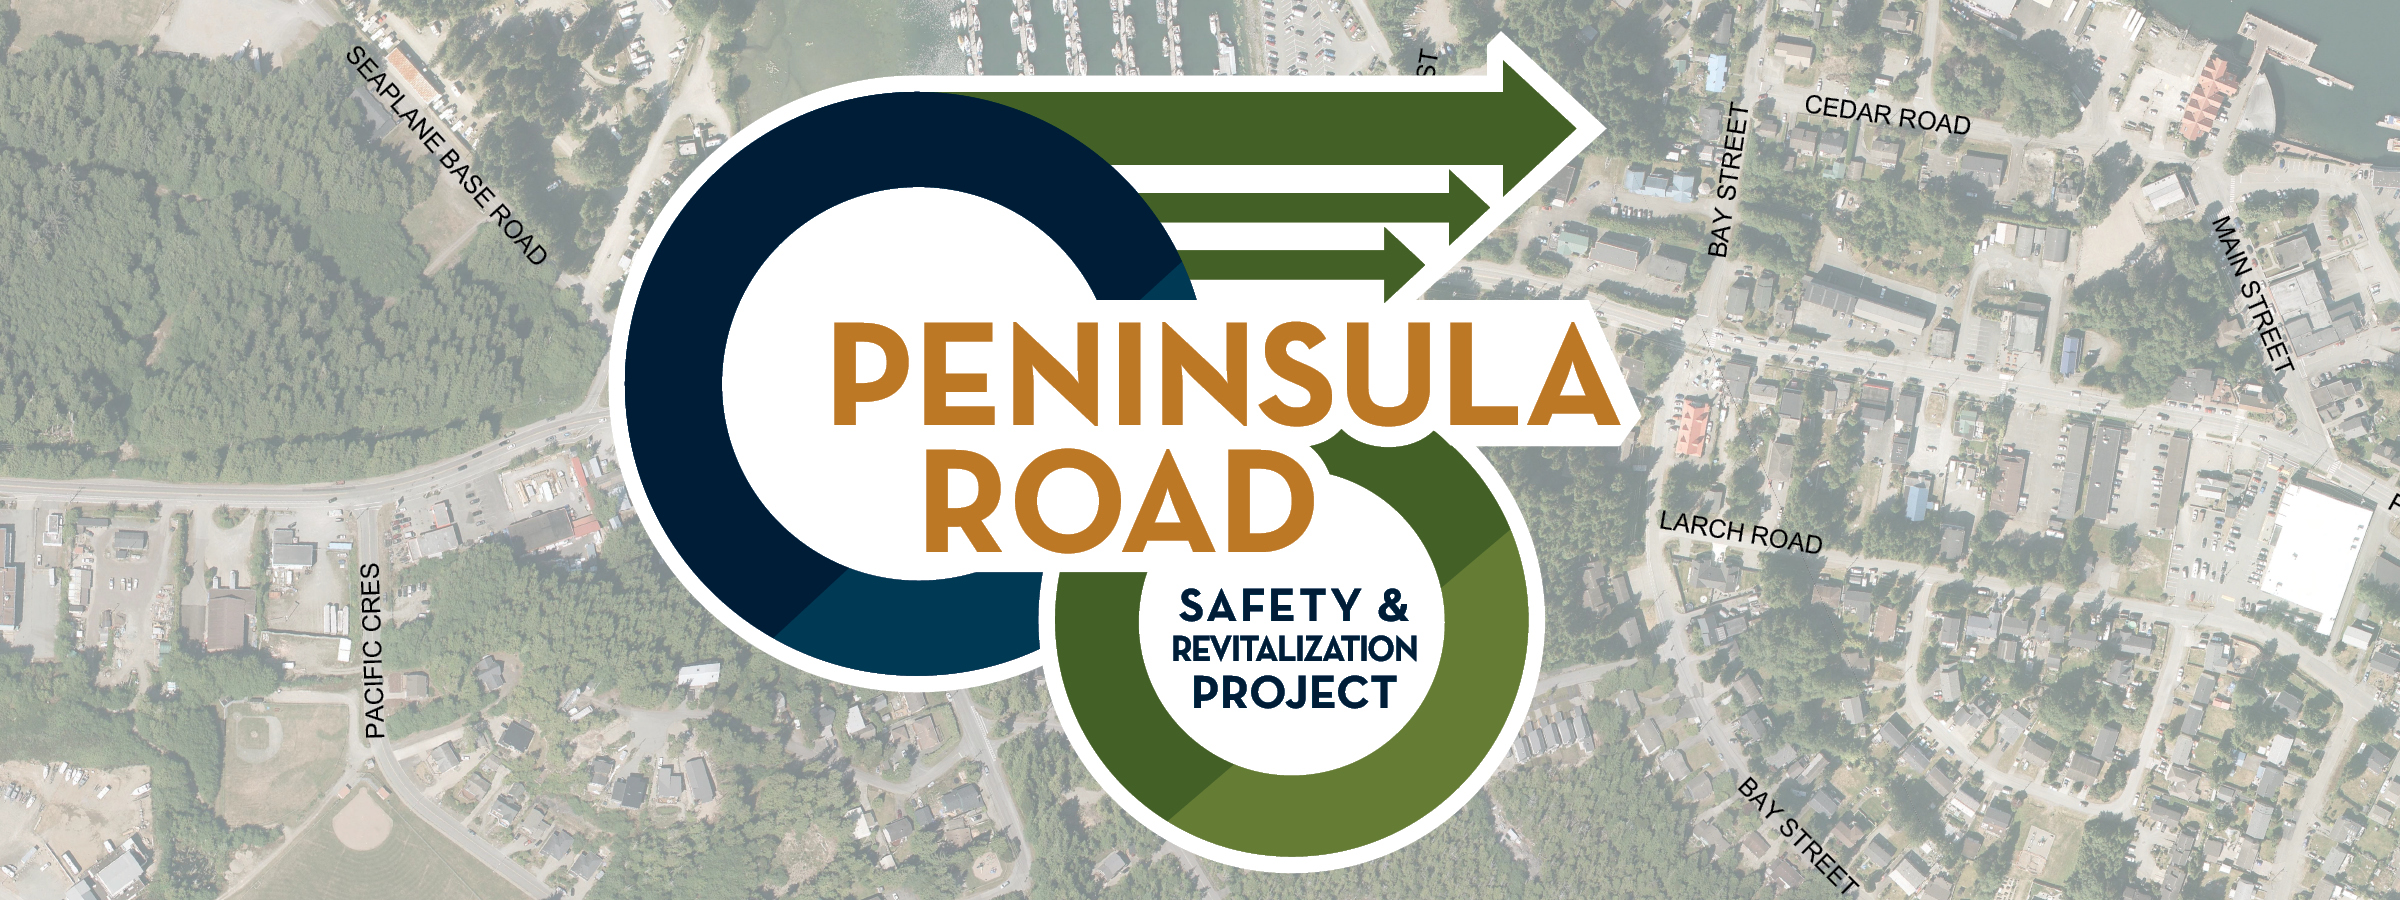 Peninsula Road Project Graphic 4